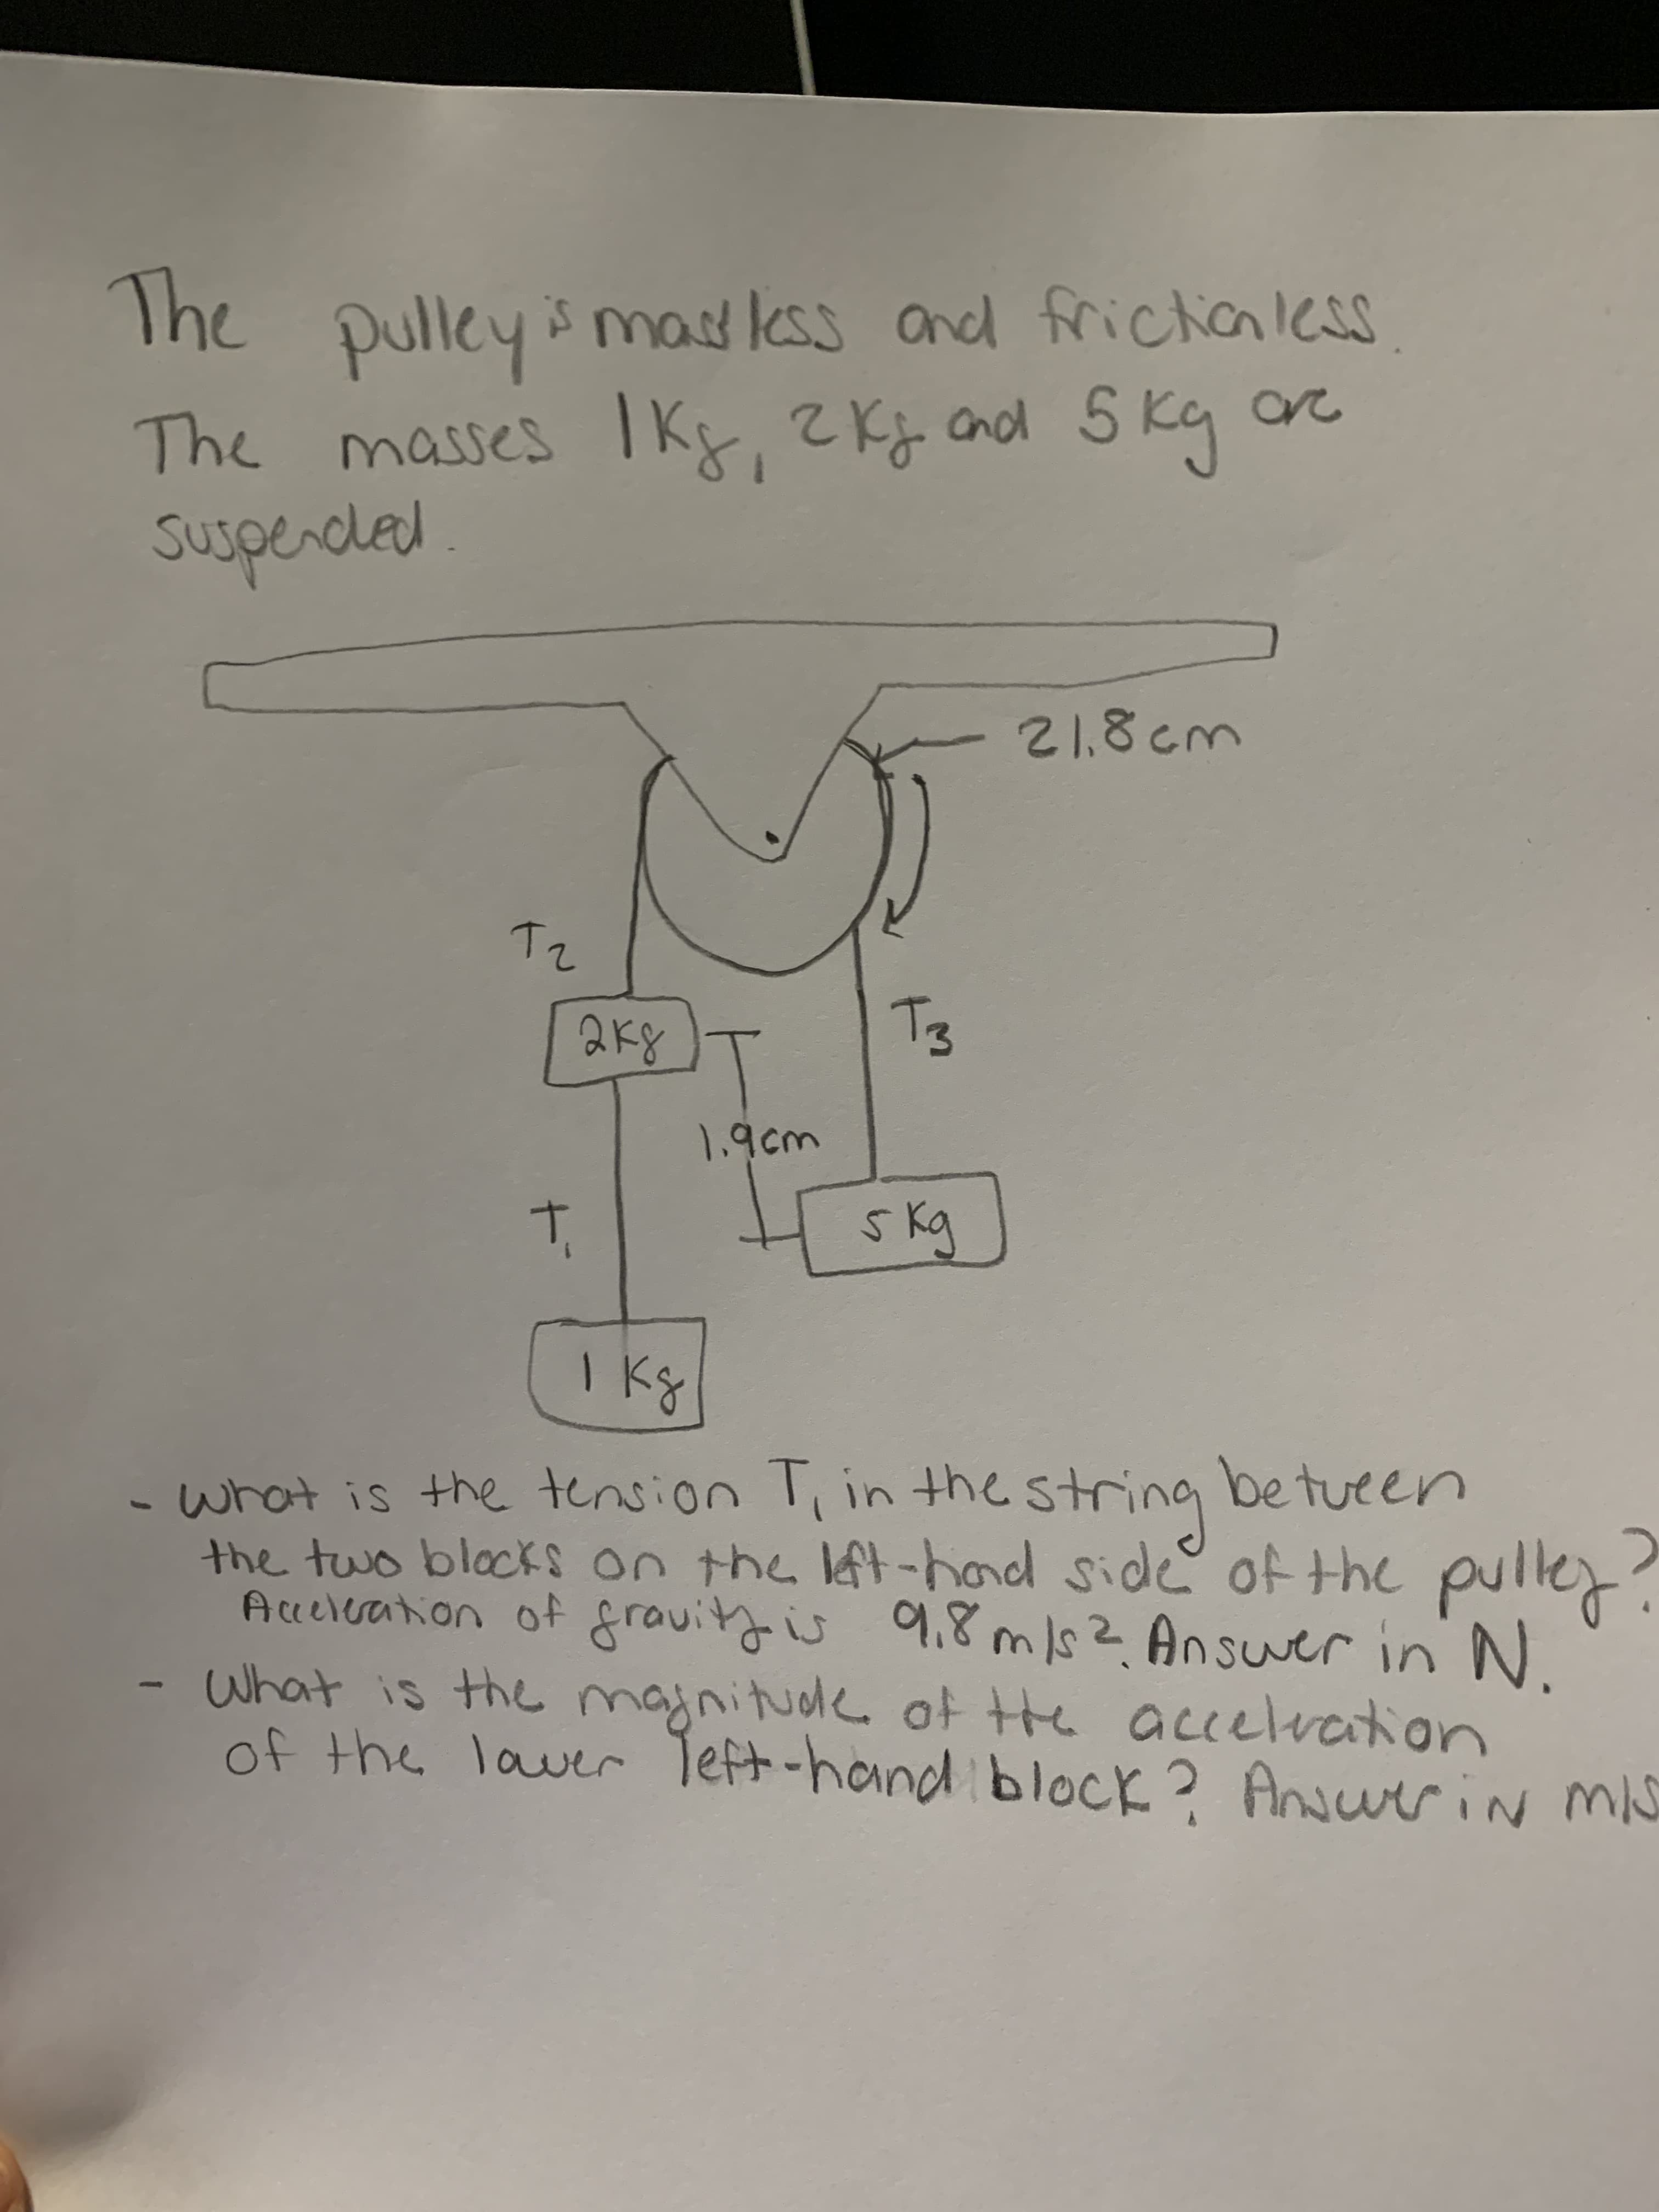 |
The
The pulley mas less and frichanless
The masses Ikx, 2Kj cnod 51
2Kg cnd 5 kg
1.9cm
-what is the tension T, in the string betueen
ing
the two blocks on the lft-hond side ofthe pulle?
Acceleation of gravityis
9,8 ms?Answer in N.
What is the majnitude ot tte accelvction
of the laver Teft-hand block? Ansurin mis
